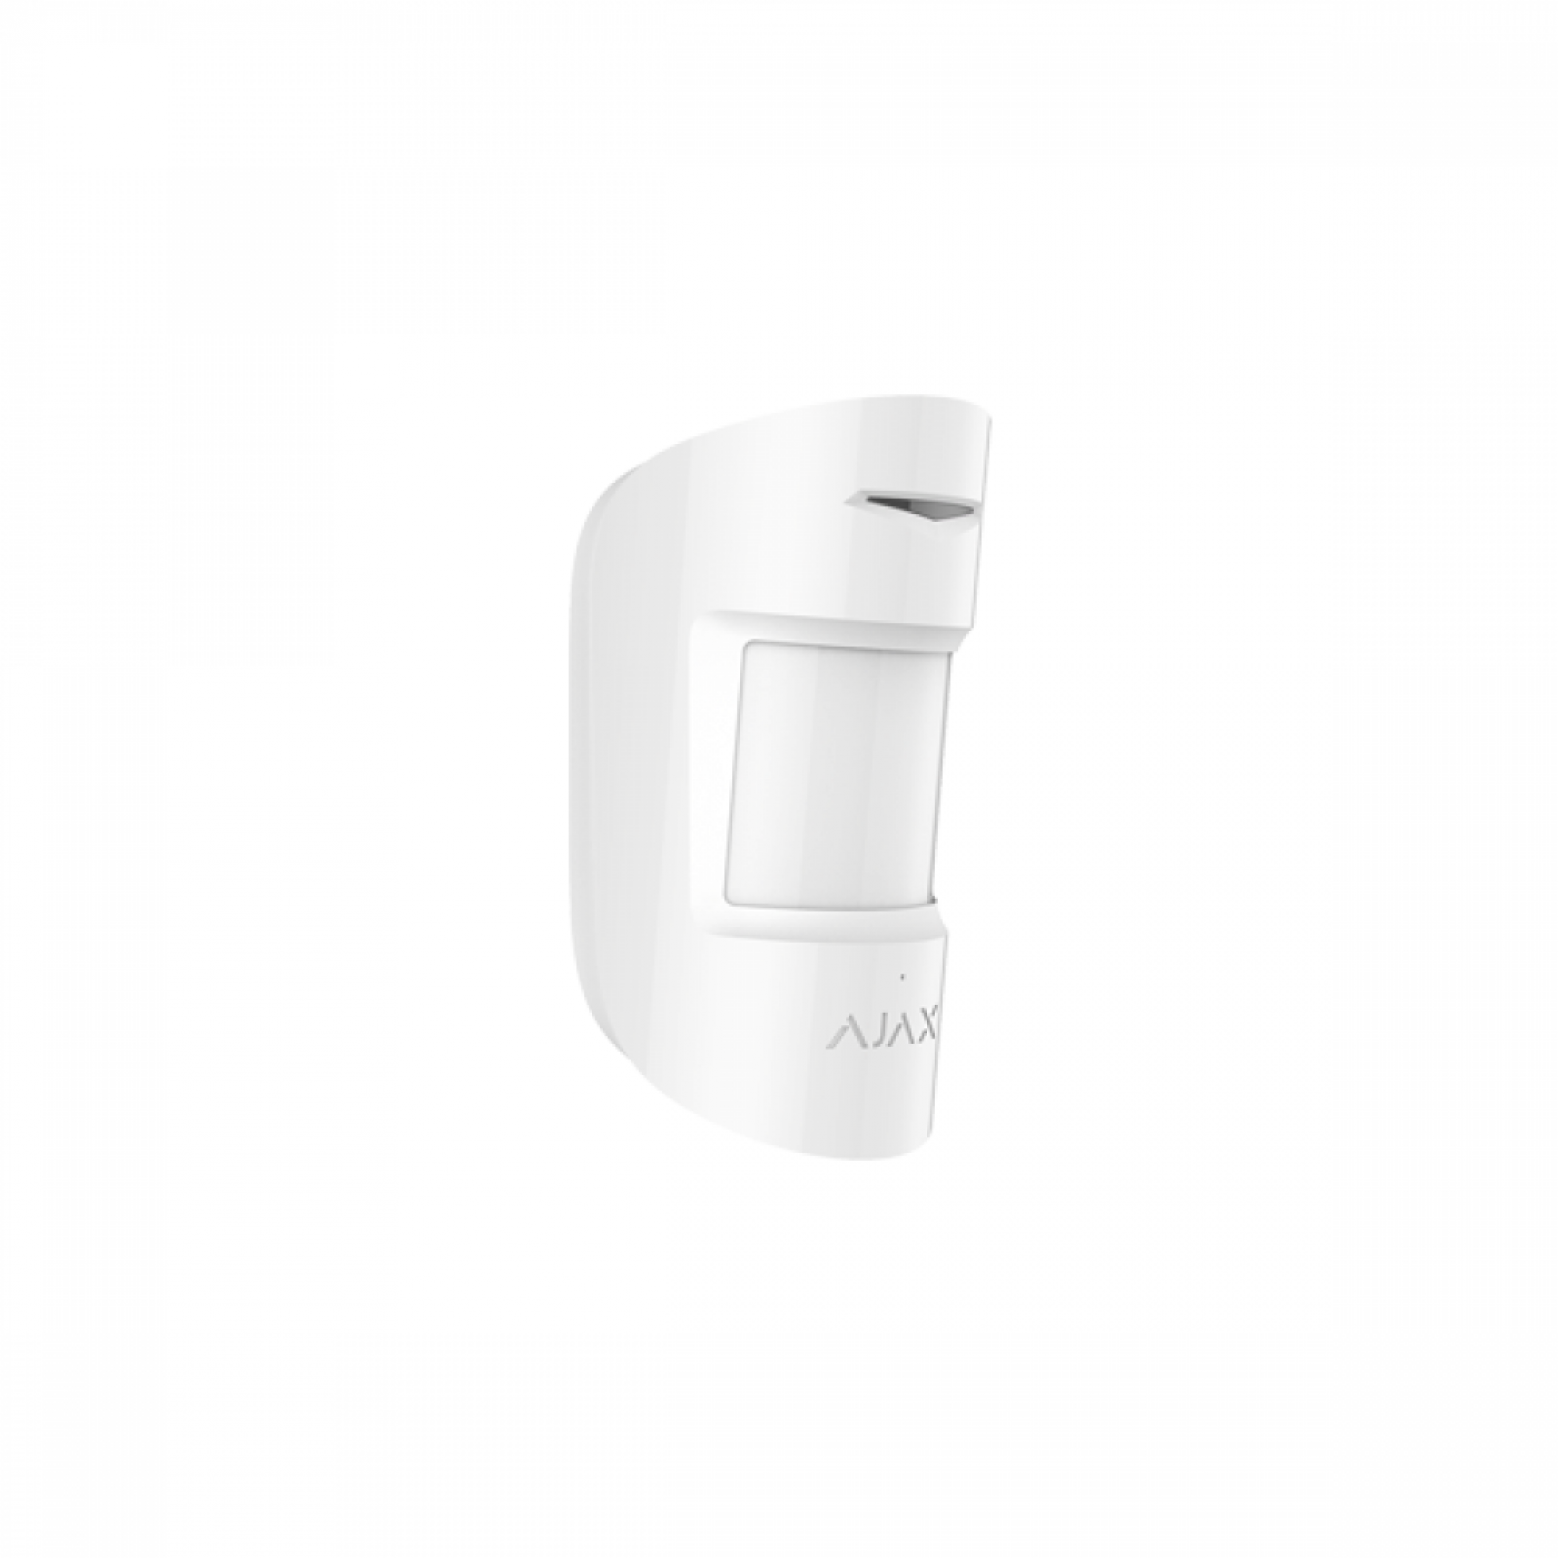 AJAX CombiProtect motion detector with glass breakage detector wireless